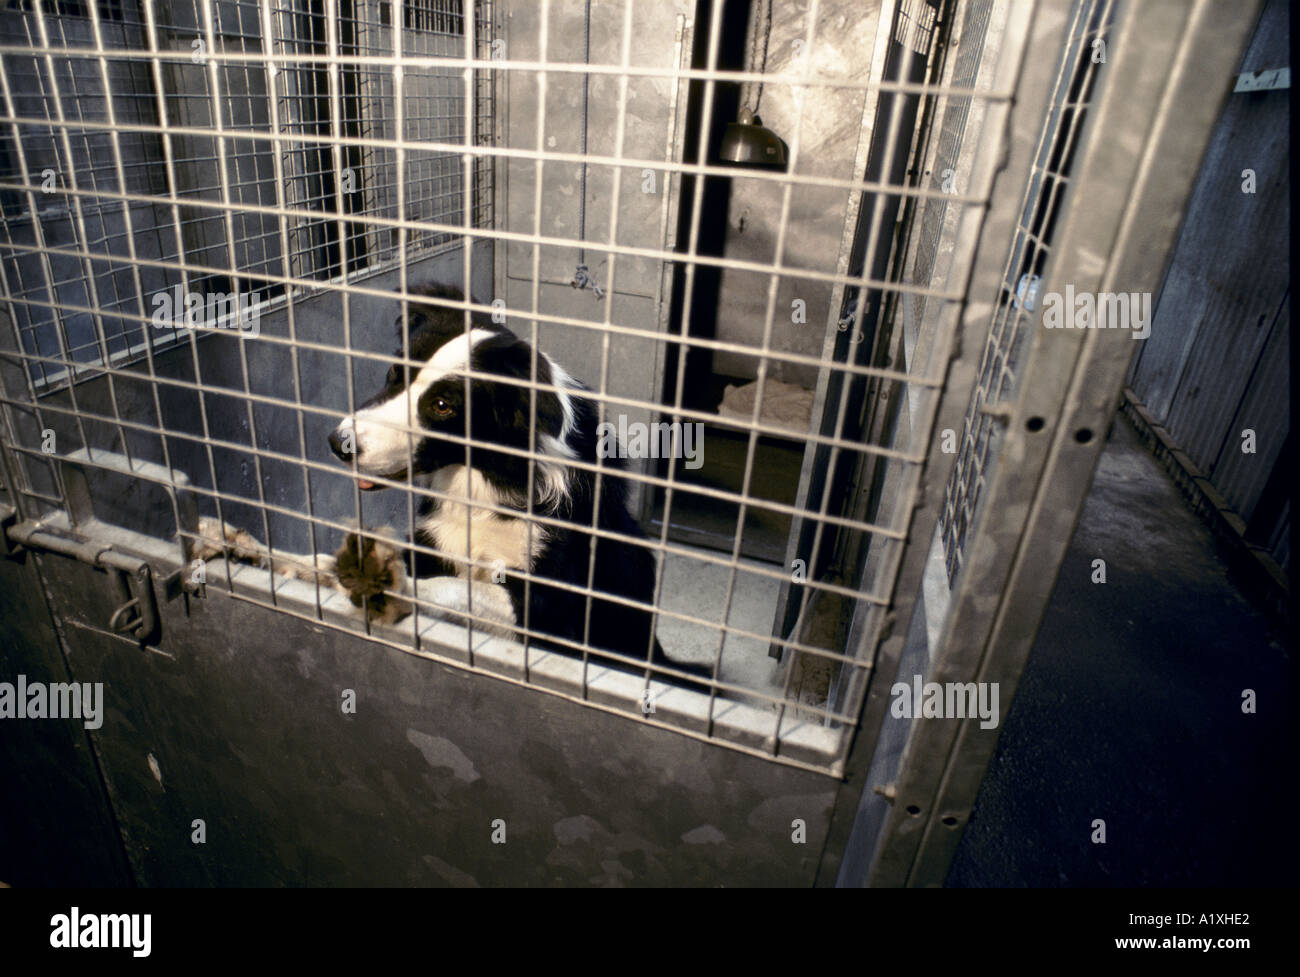 STRAY DOG LOOKING THROUGH THE BARS OF METAL CAGE IN POUND HARINGEY LONDON Stock Photo